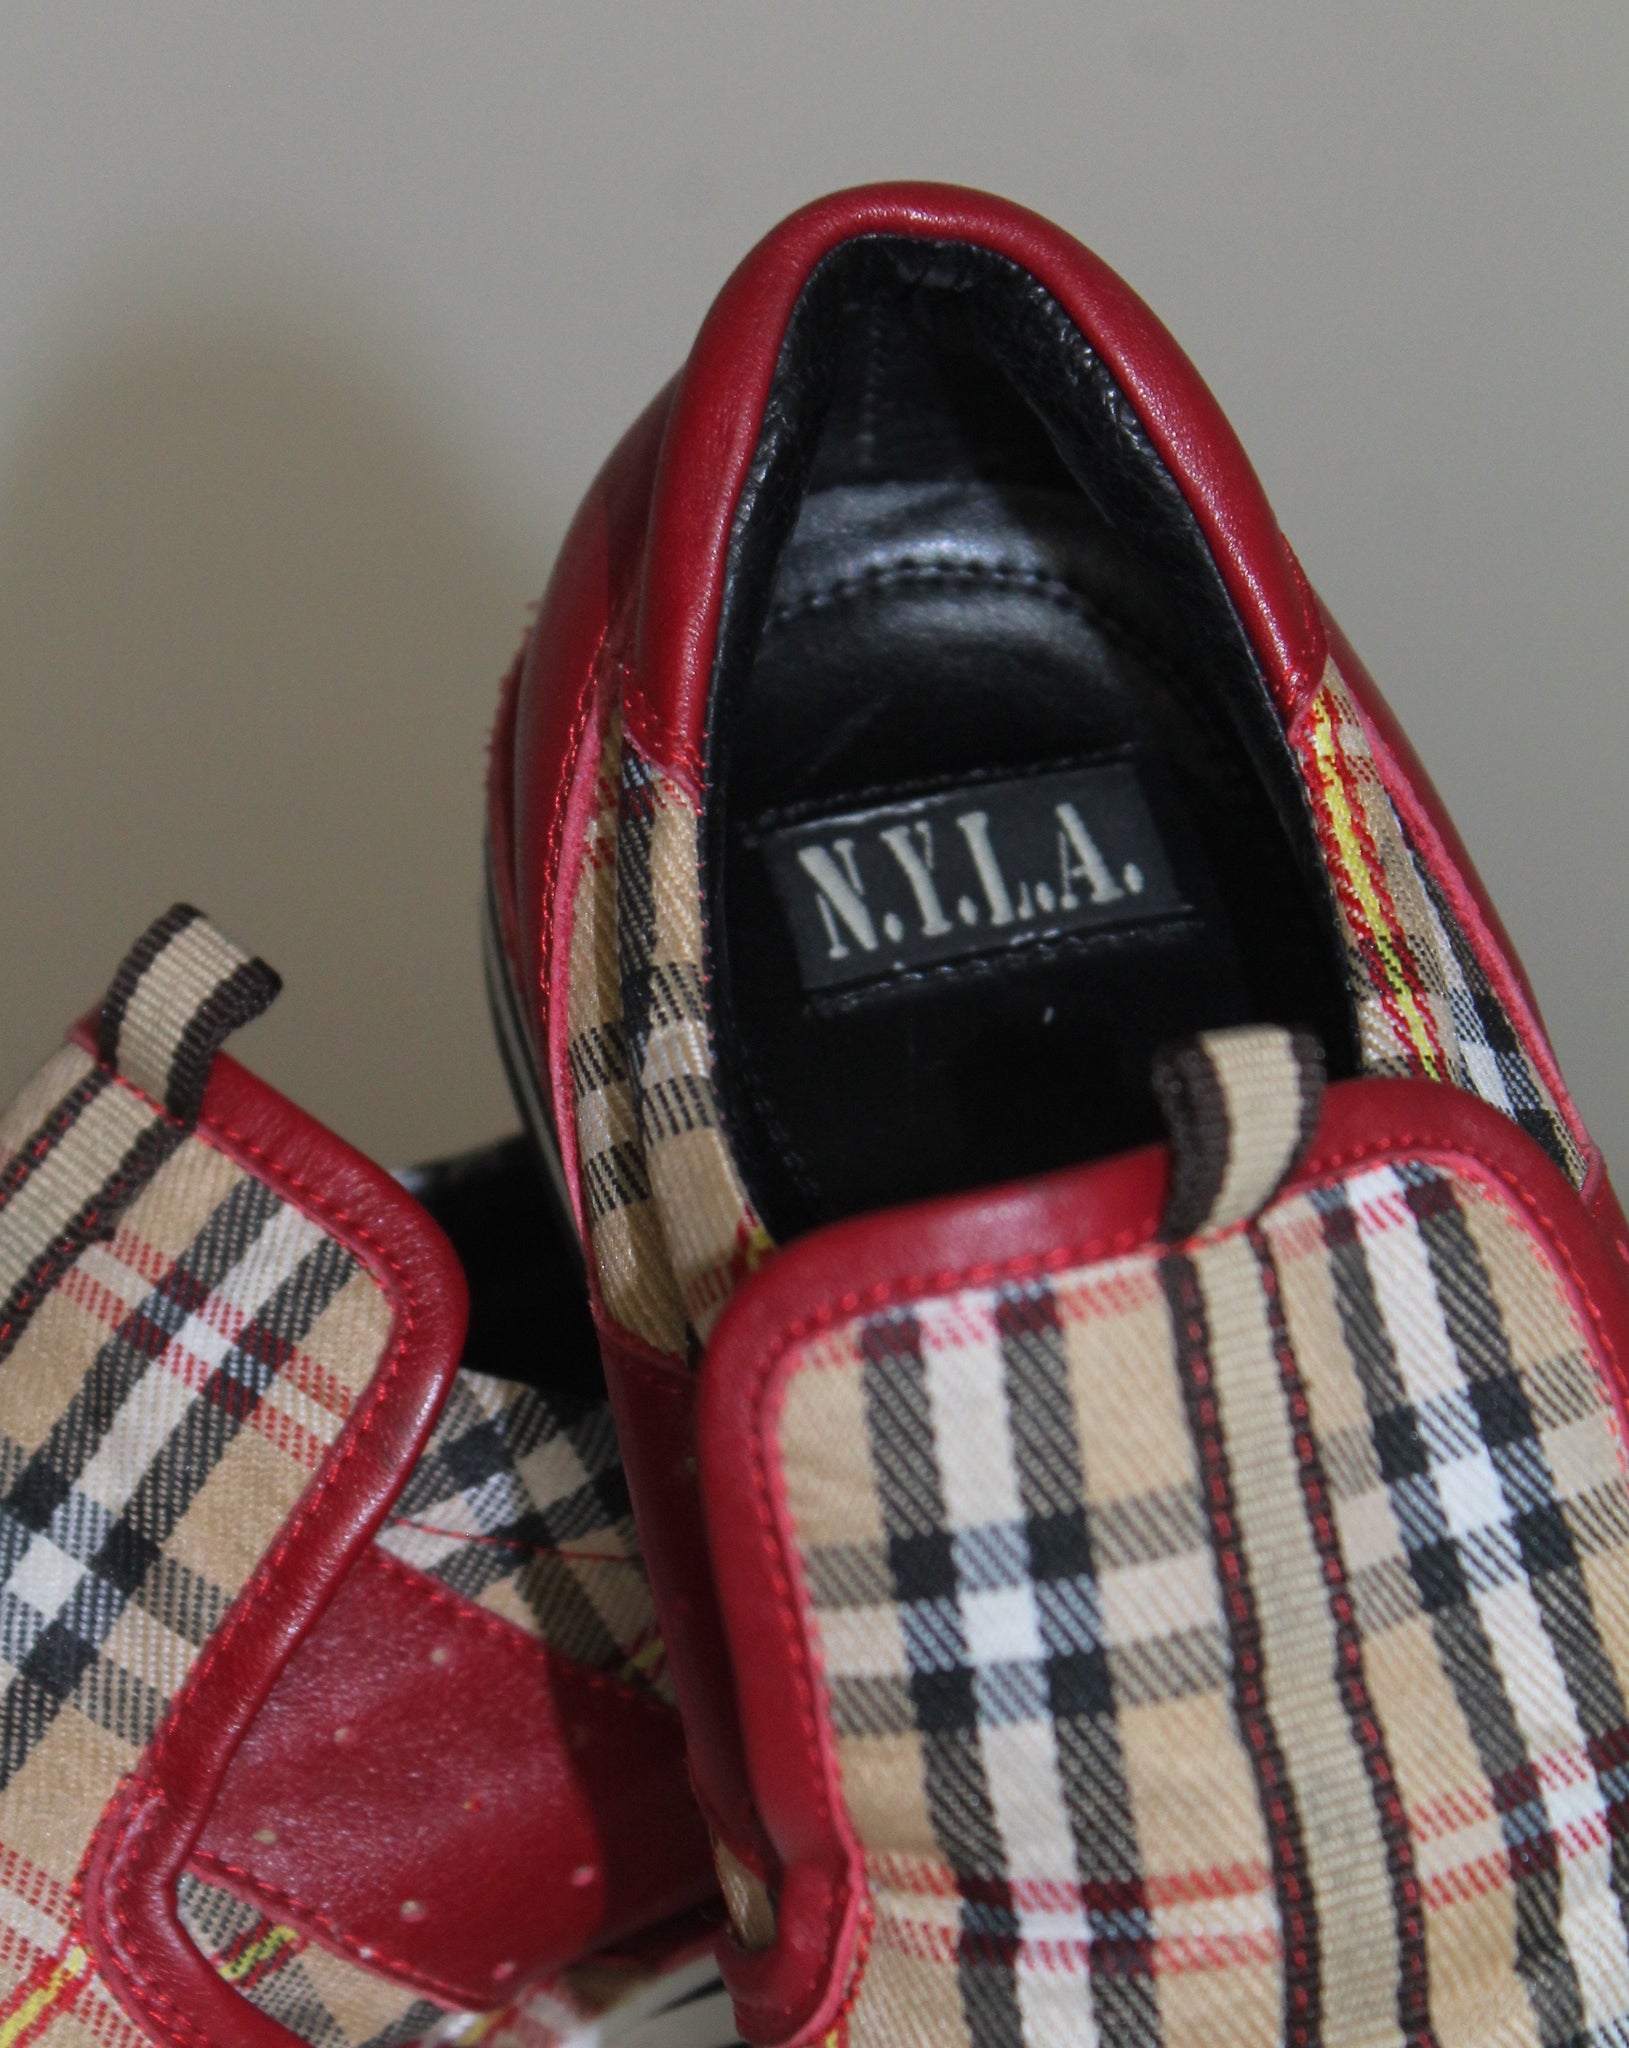 90s N.Y.L.A. Plaid Sneakers (size 38)